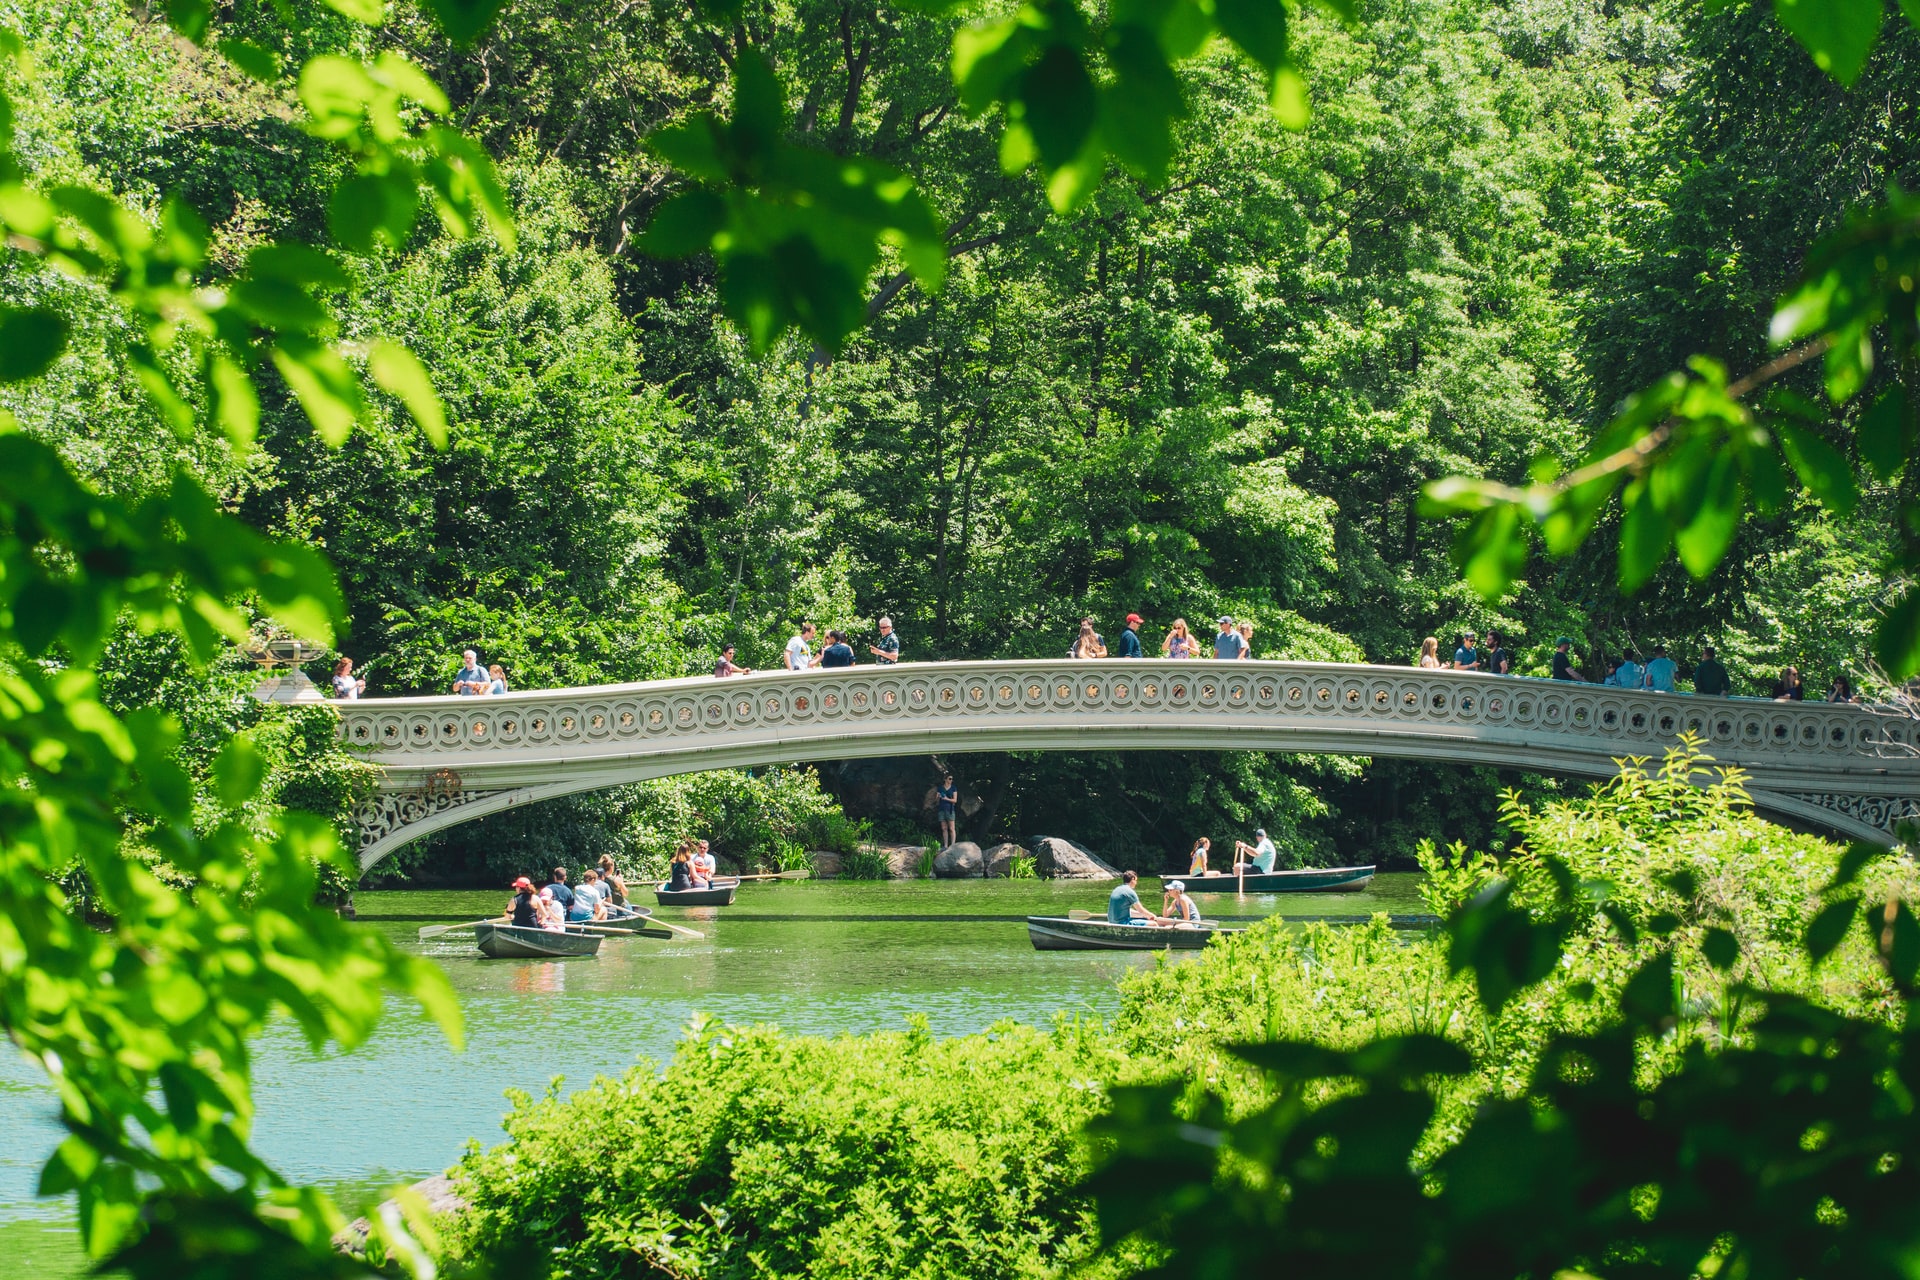 People rowing boats in the lake at Central Park